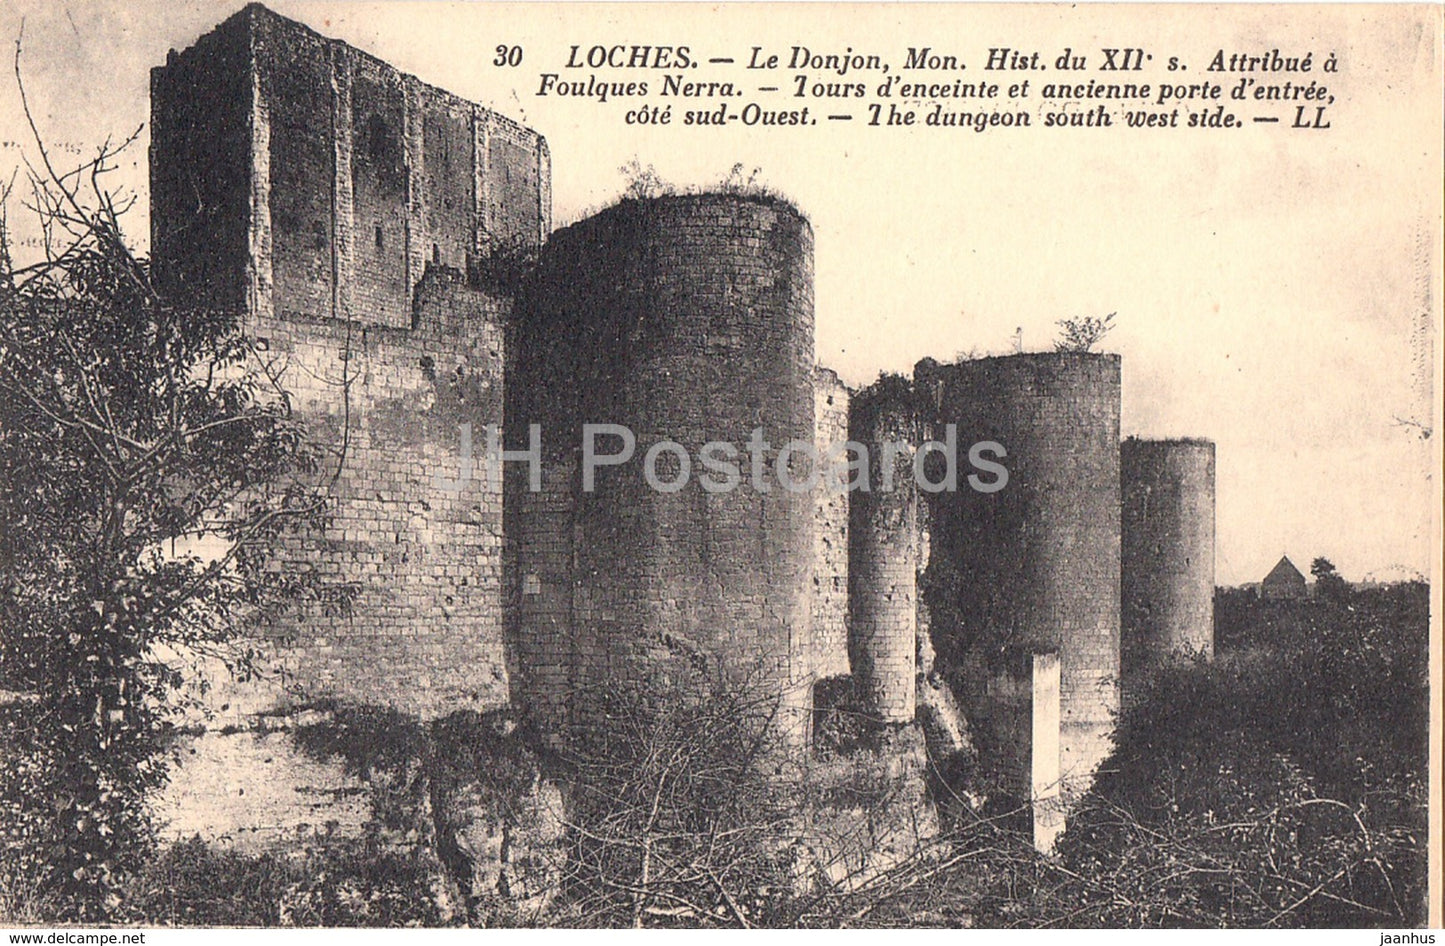 Loches - Le Donjon - Attribue a Foulques Nerra -  30 - old postcard - France - unused